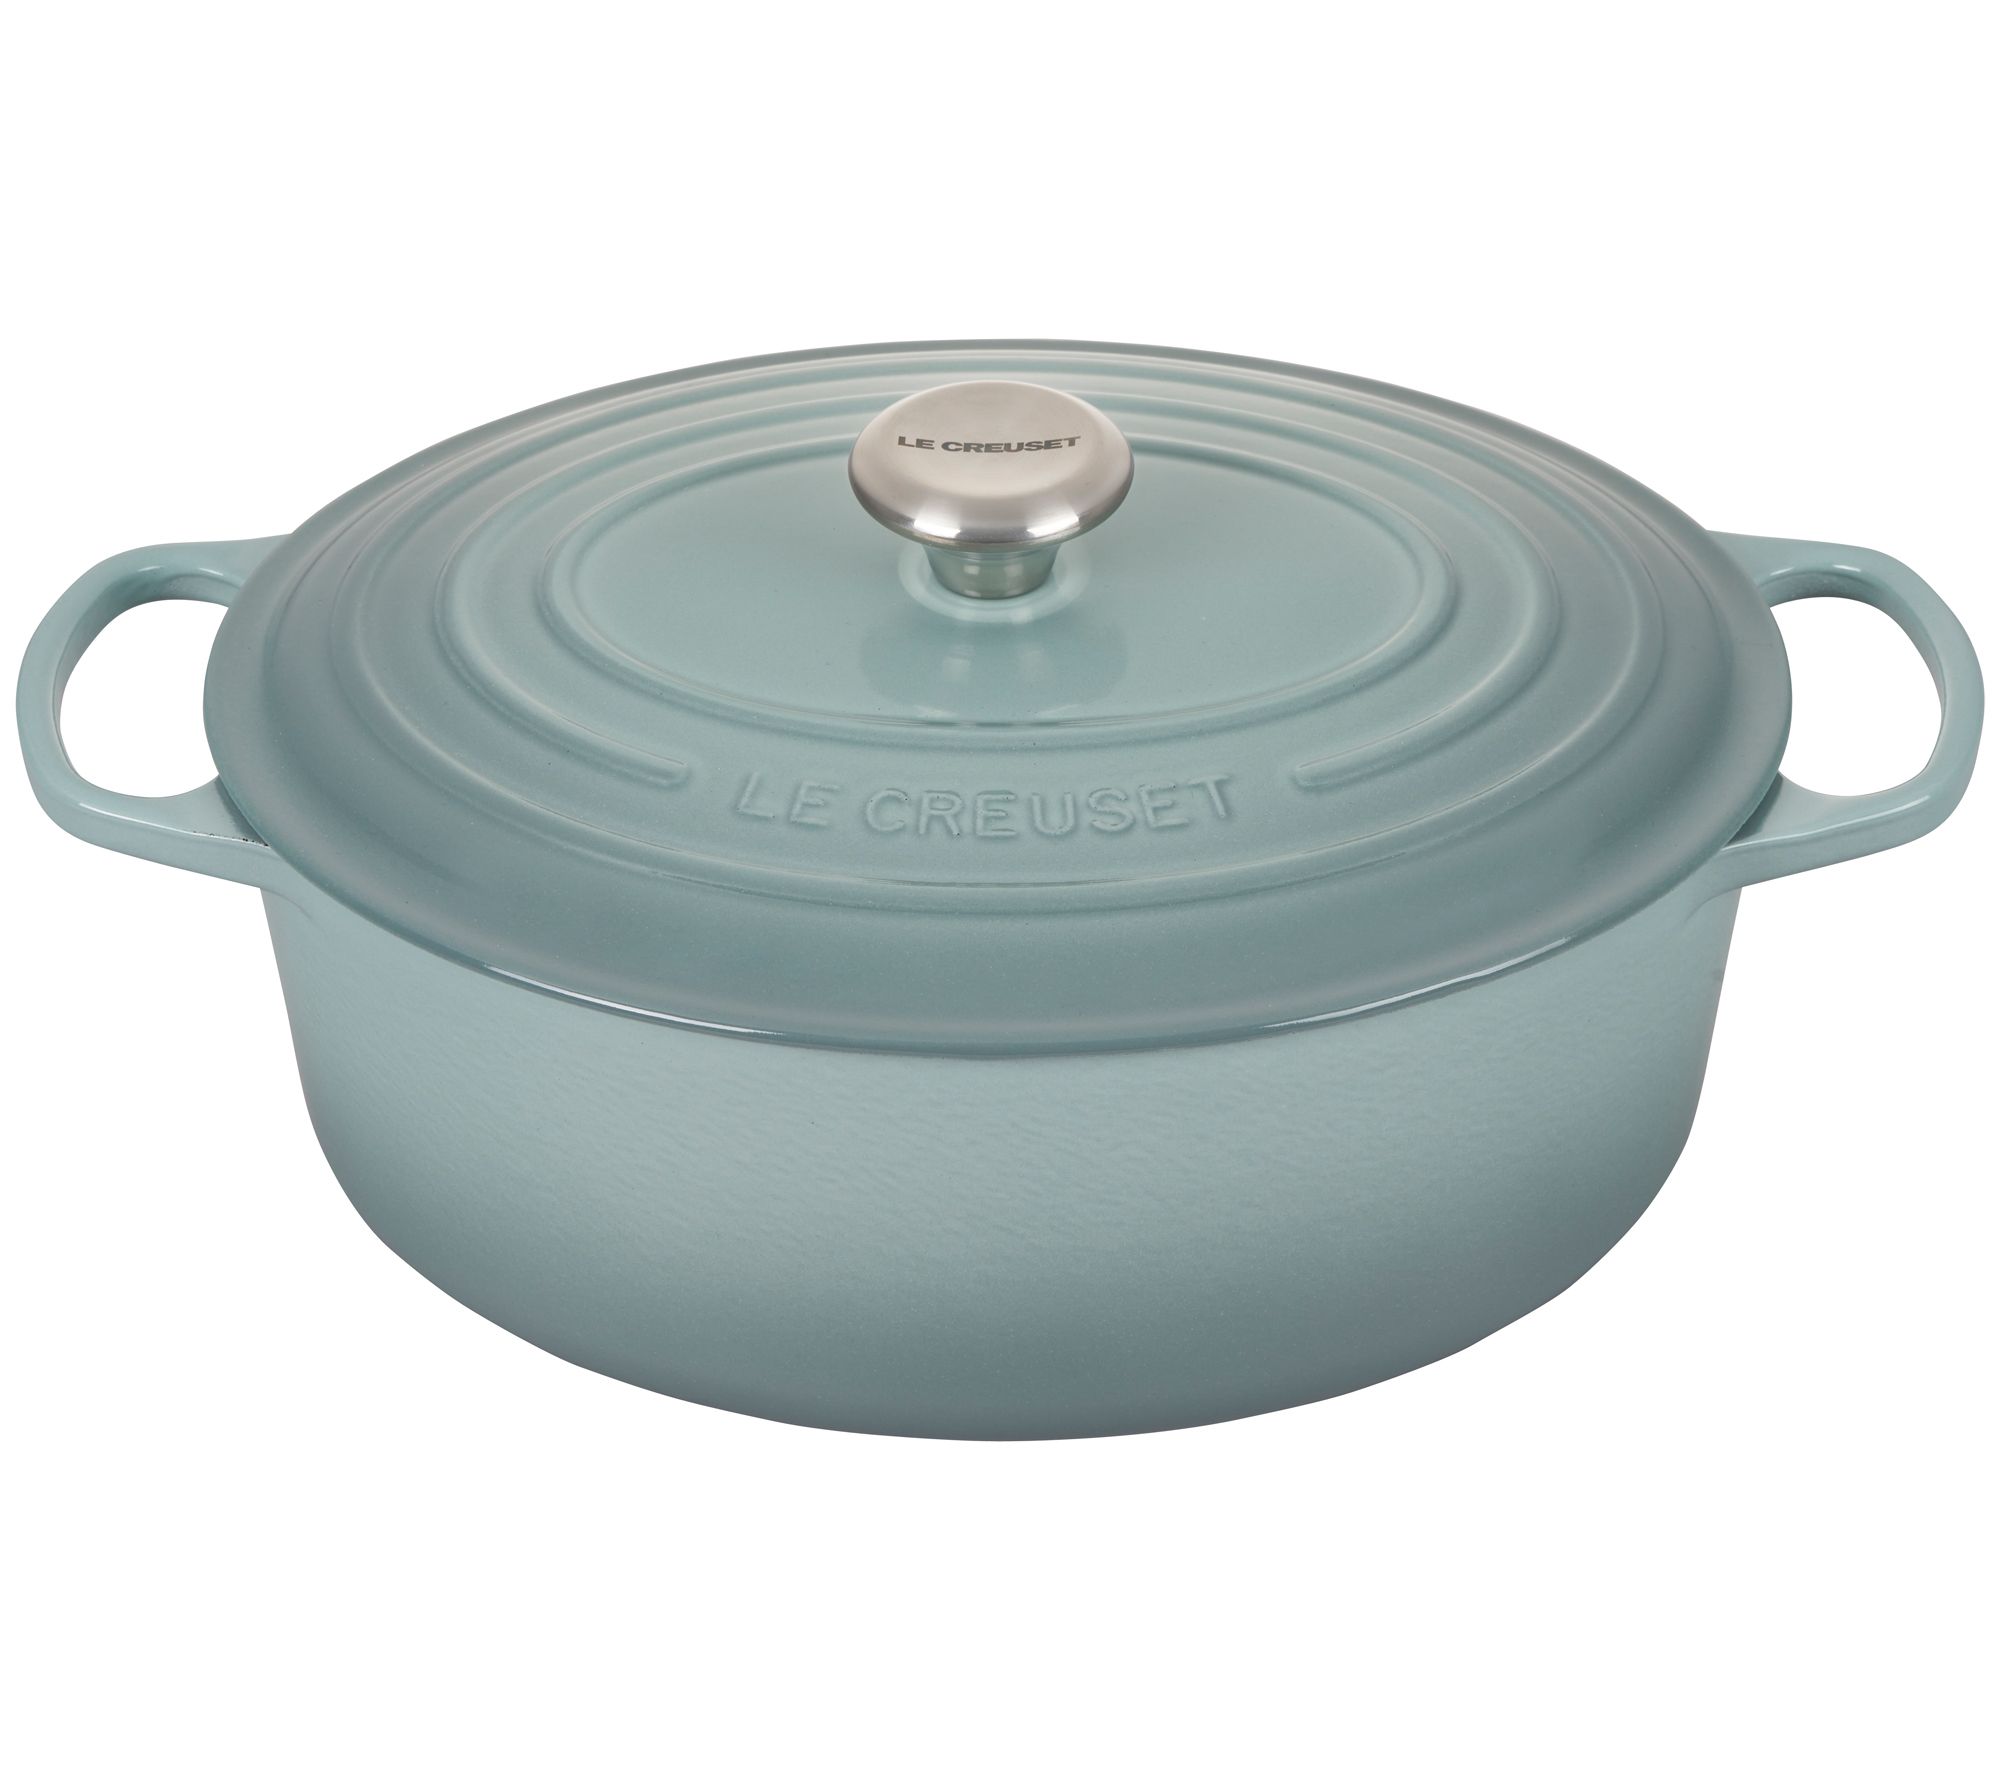 Crock Pot Artisan 3-qt Covered Dutch Oven with Mitts on QVC 